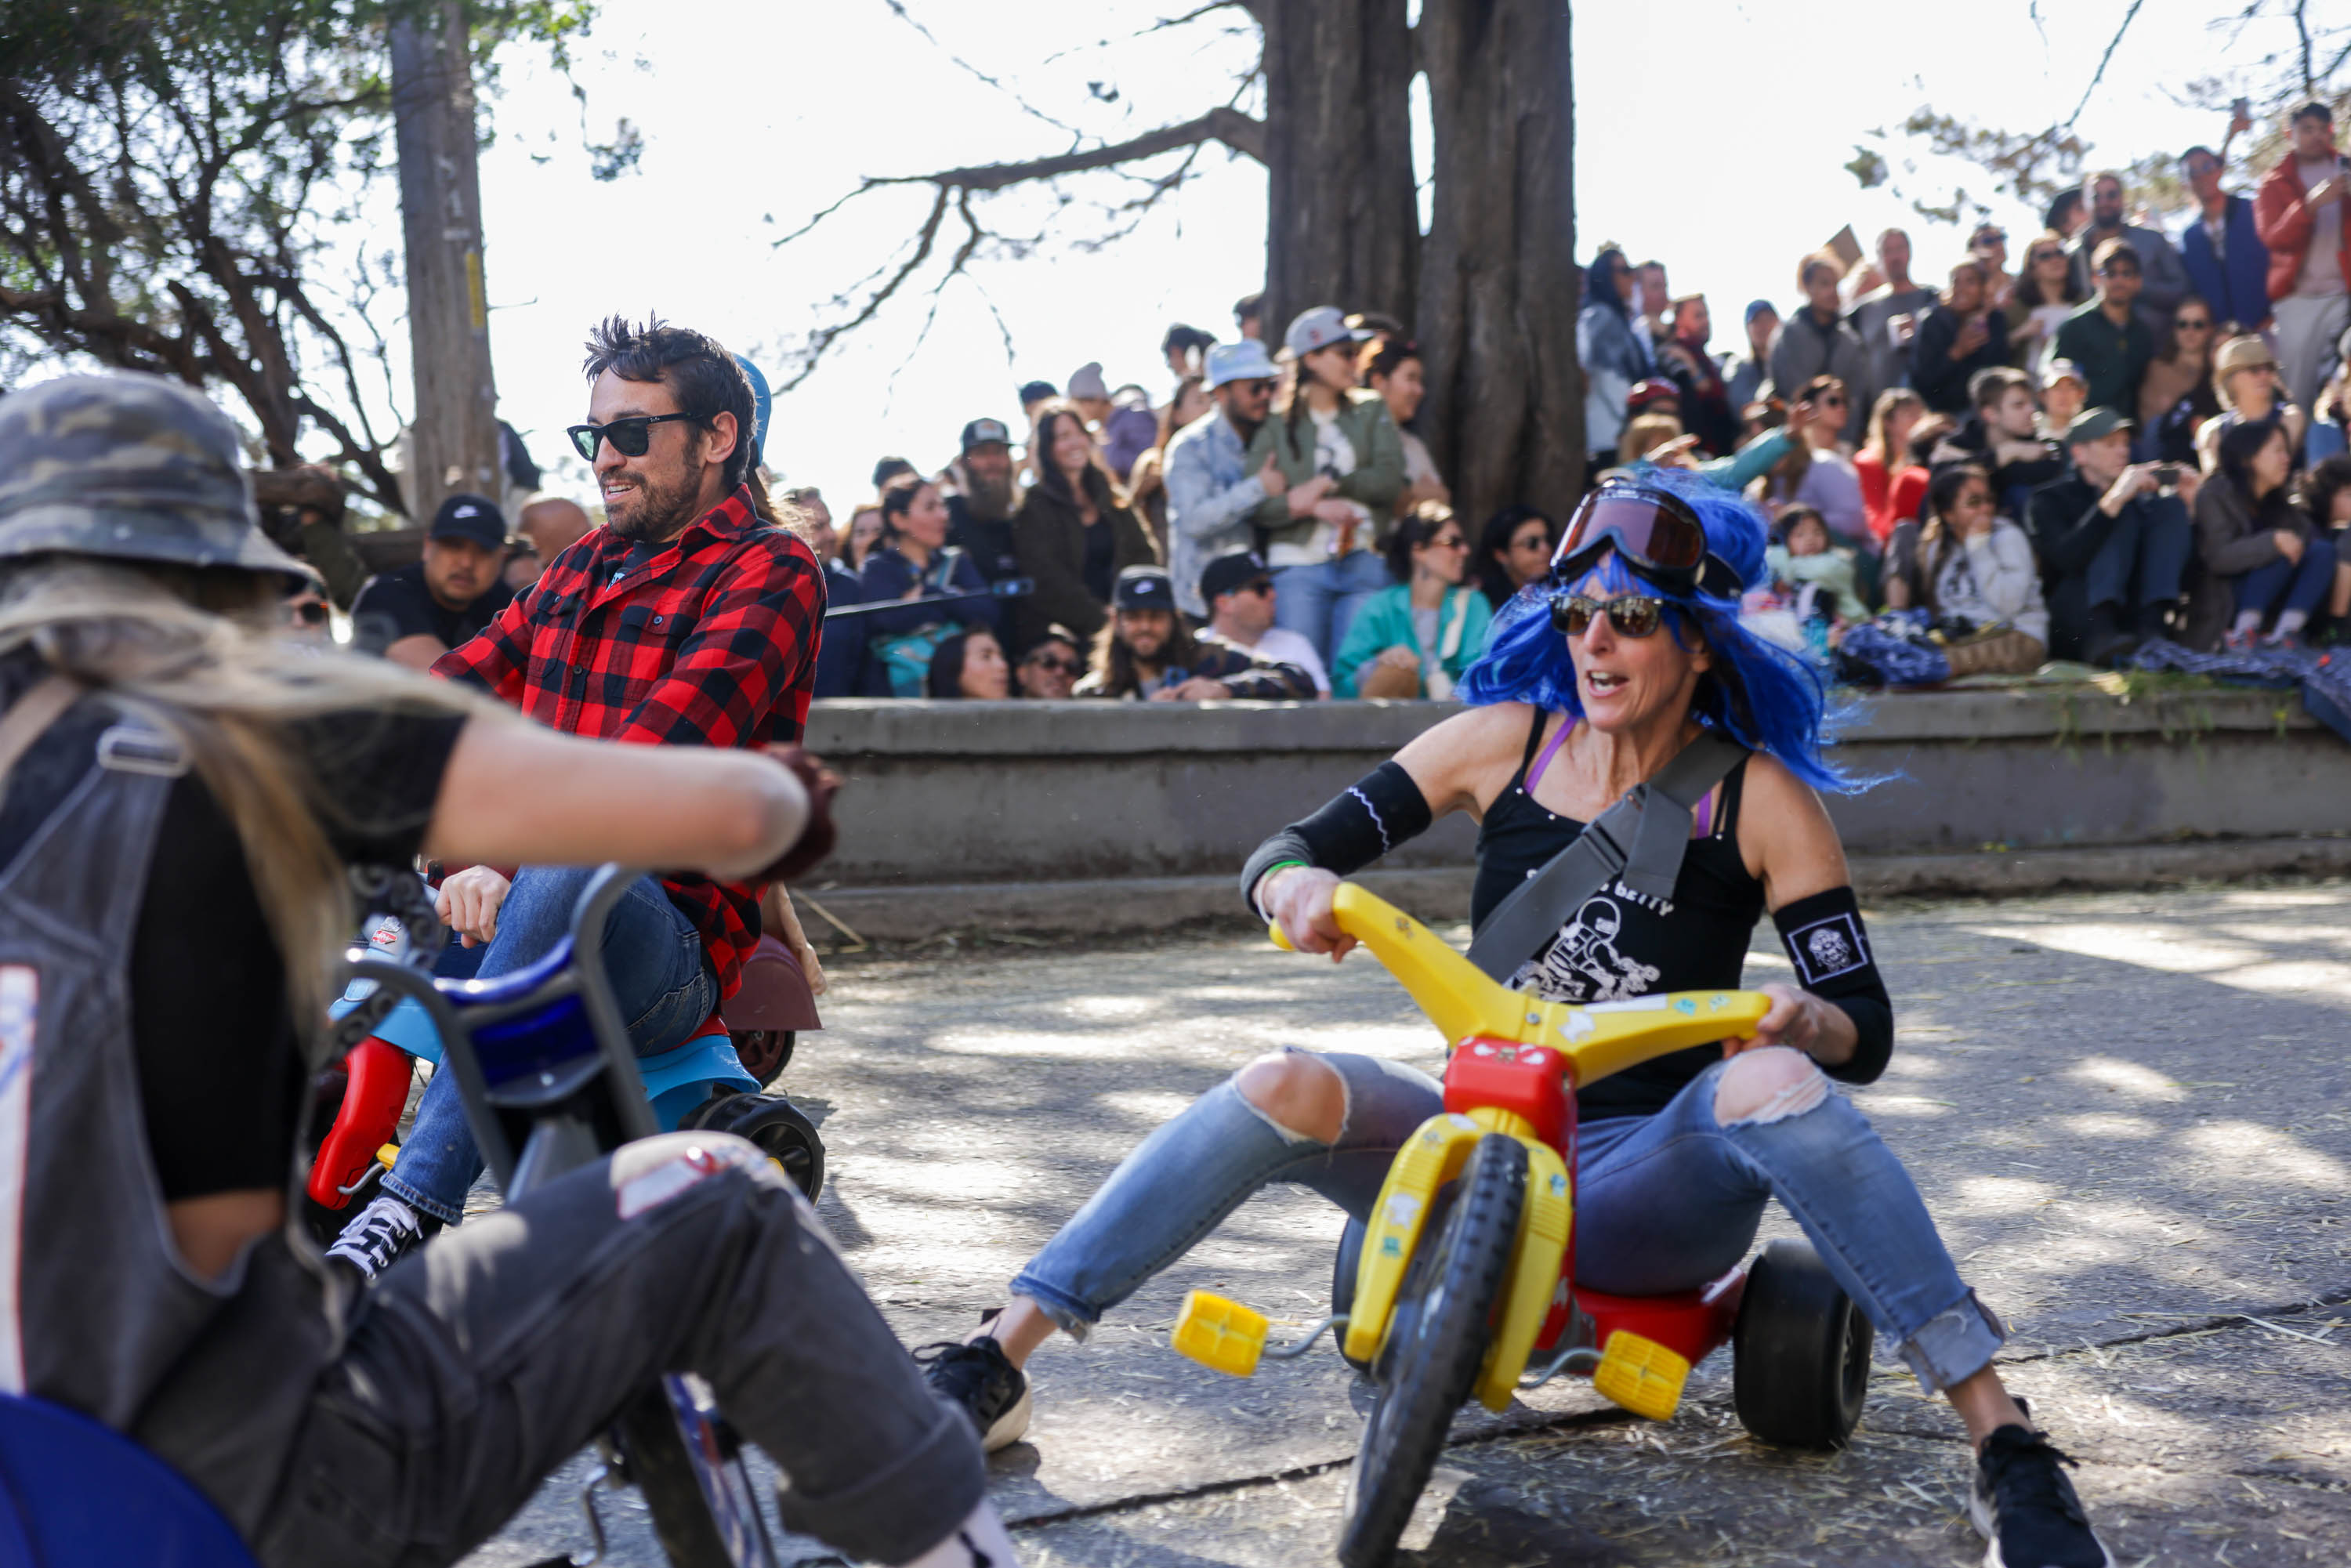 Adults race on children's tricycles before a crowd, displaying fun and competition.